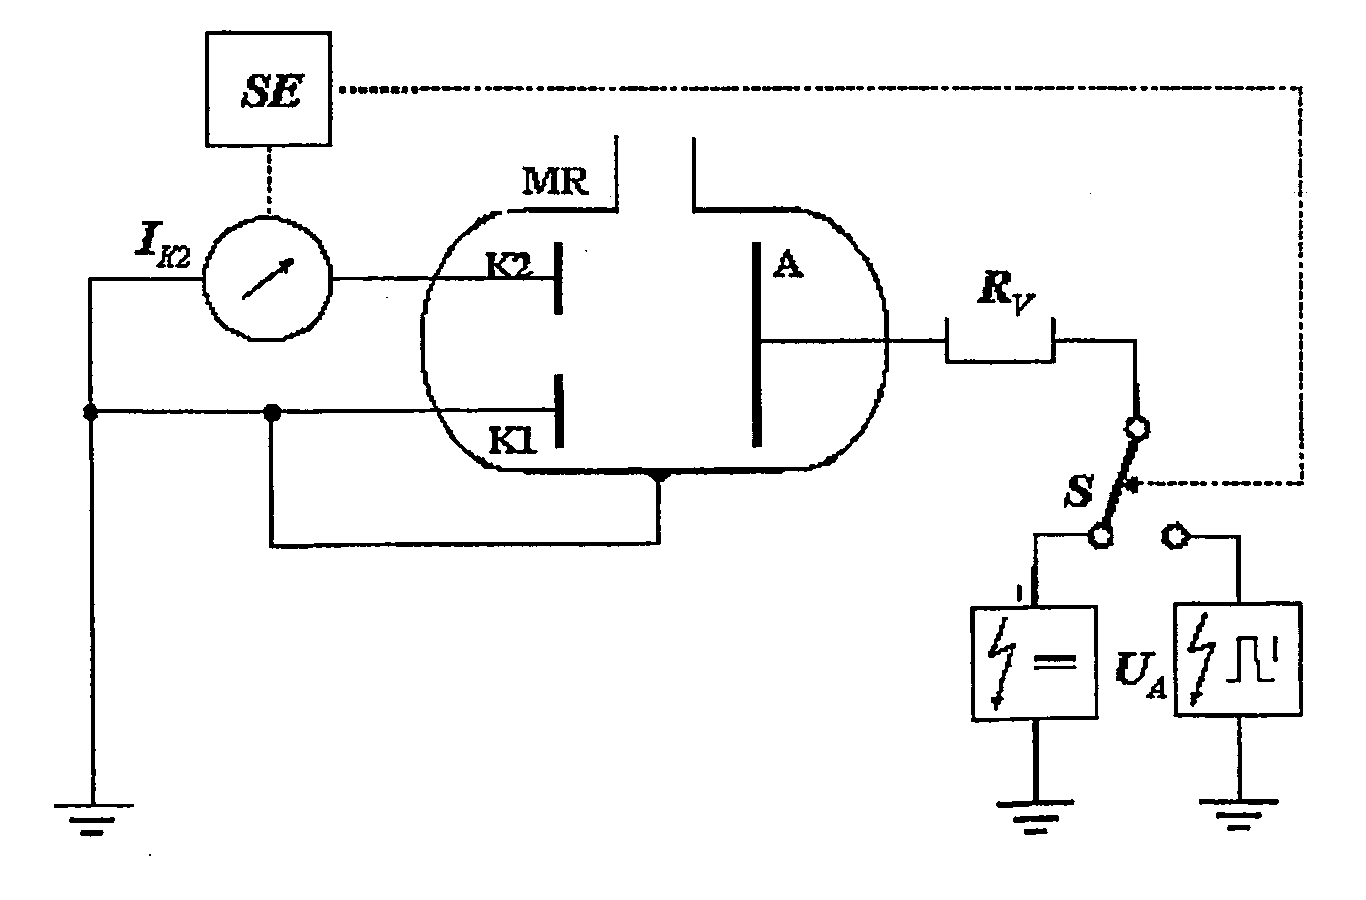 Cold-cathode ionisation manometer having a longer service life due to two separate cathodes